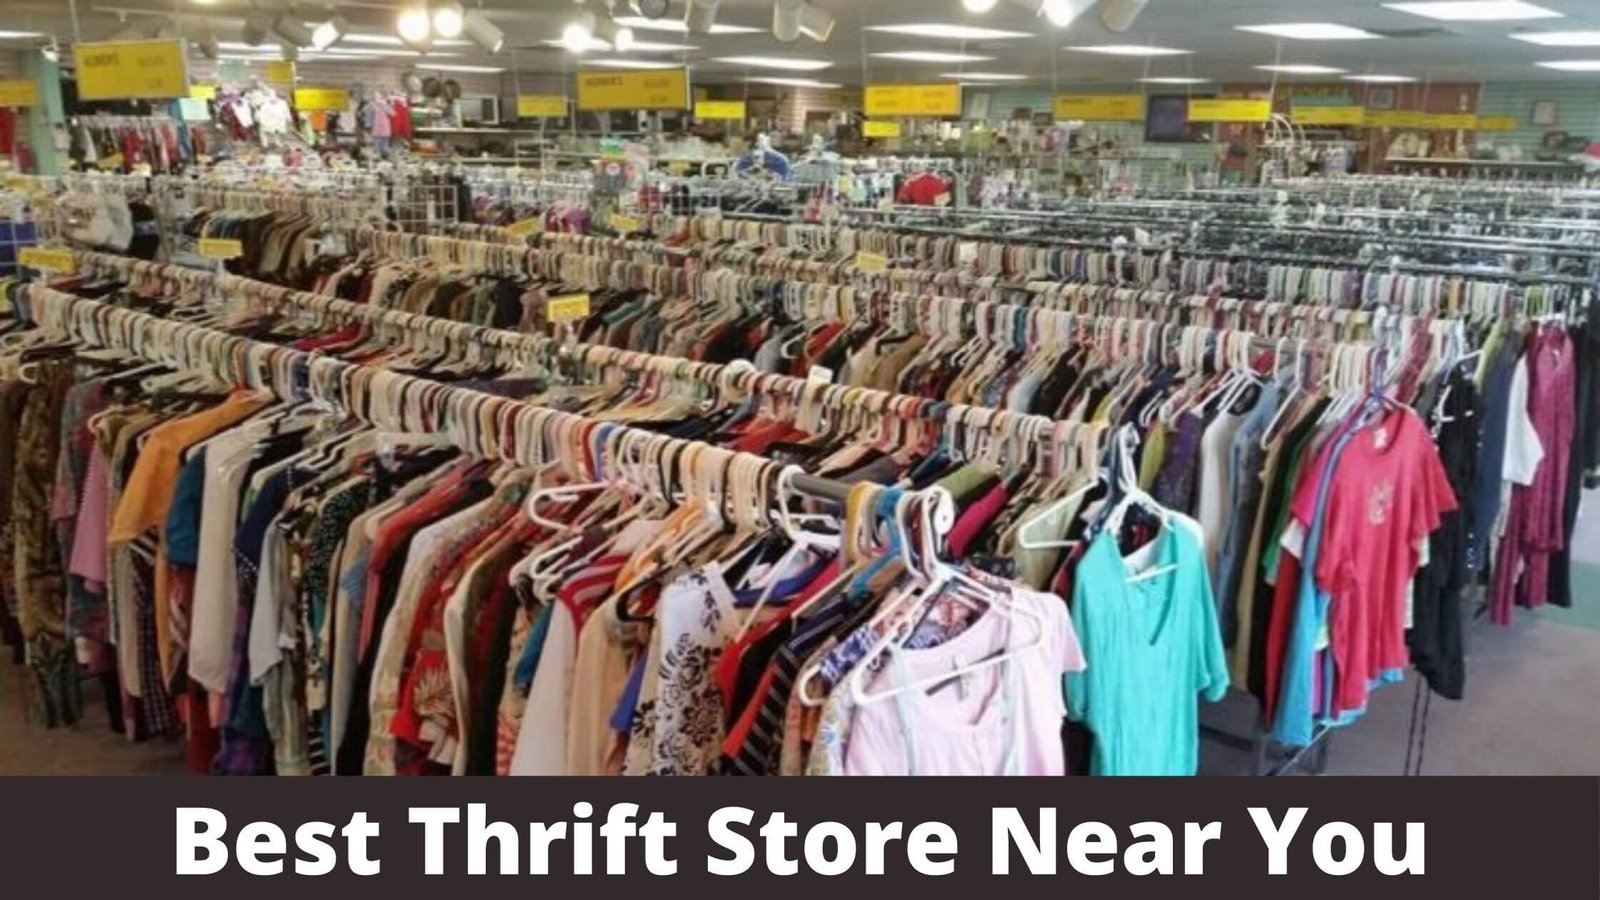 Find Thrift Store Near Me - Updated March 2022